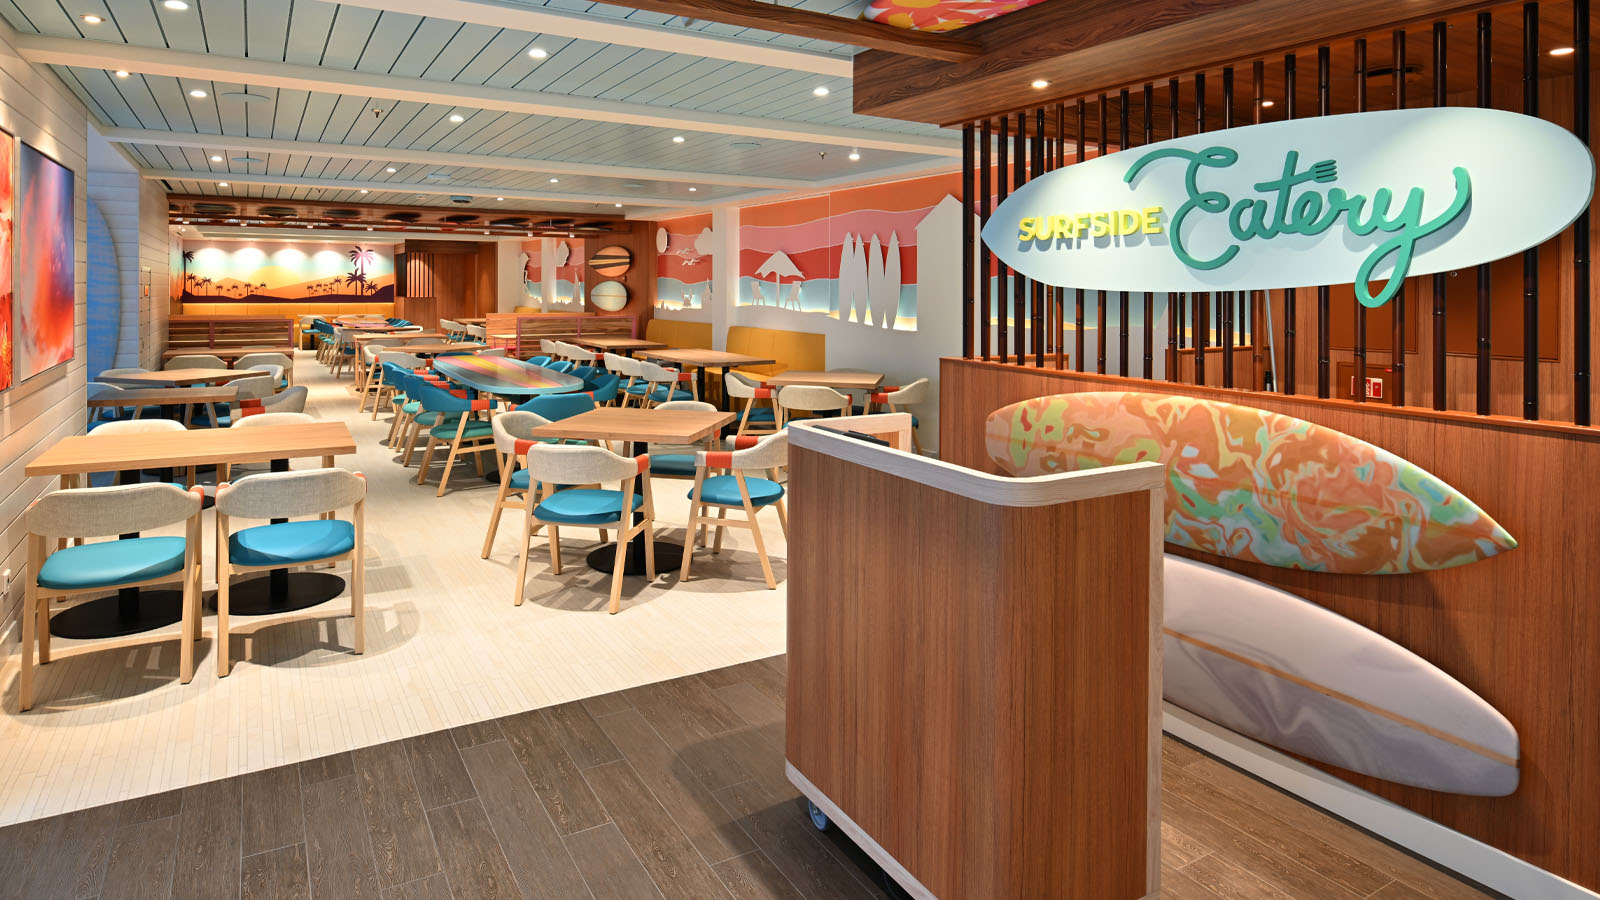 Surfside Eatery on the Royal Caribbean Icon of the Seas